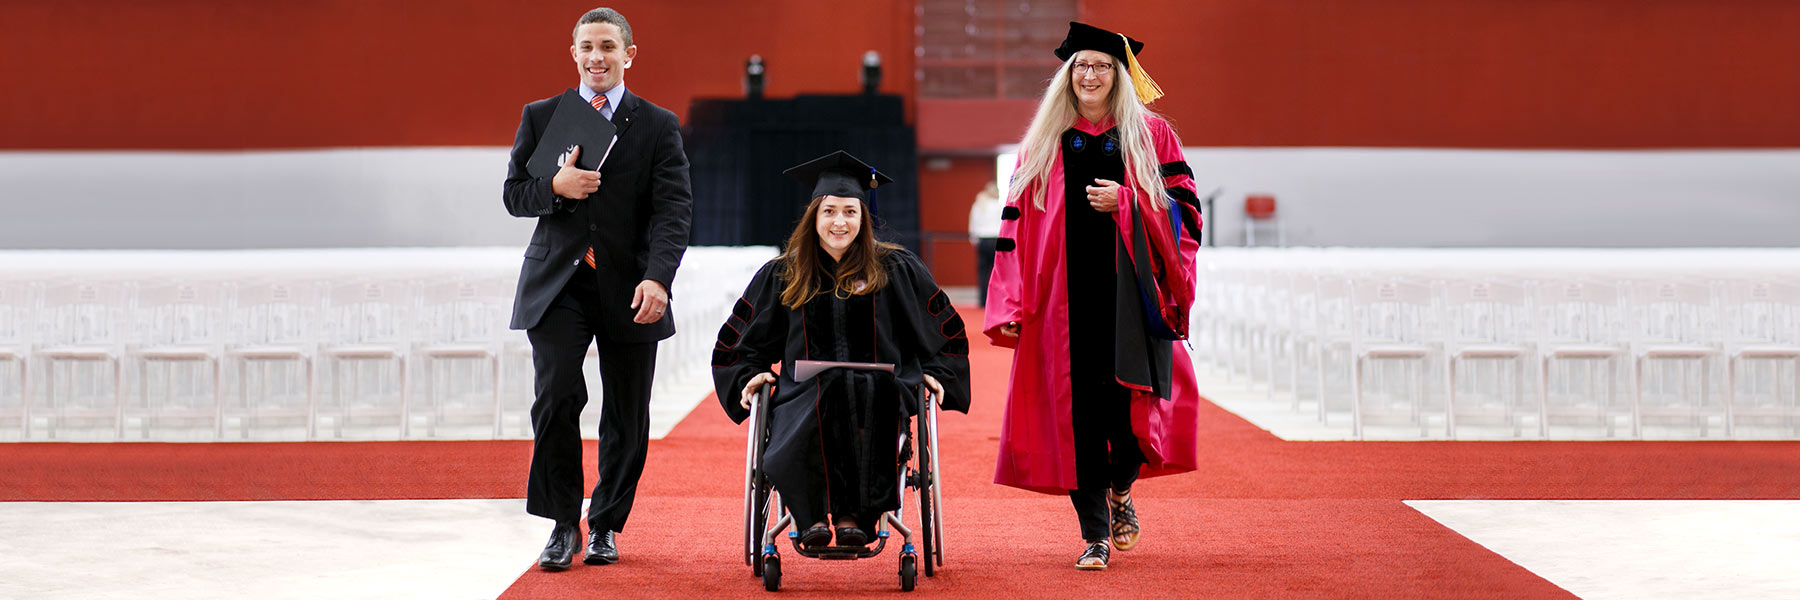 A young graduate in a wheelchair and her graduation attire moves down the red carpet. She is flanked by a smiling man and a female faculty member in full academic regalia.